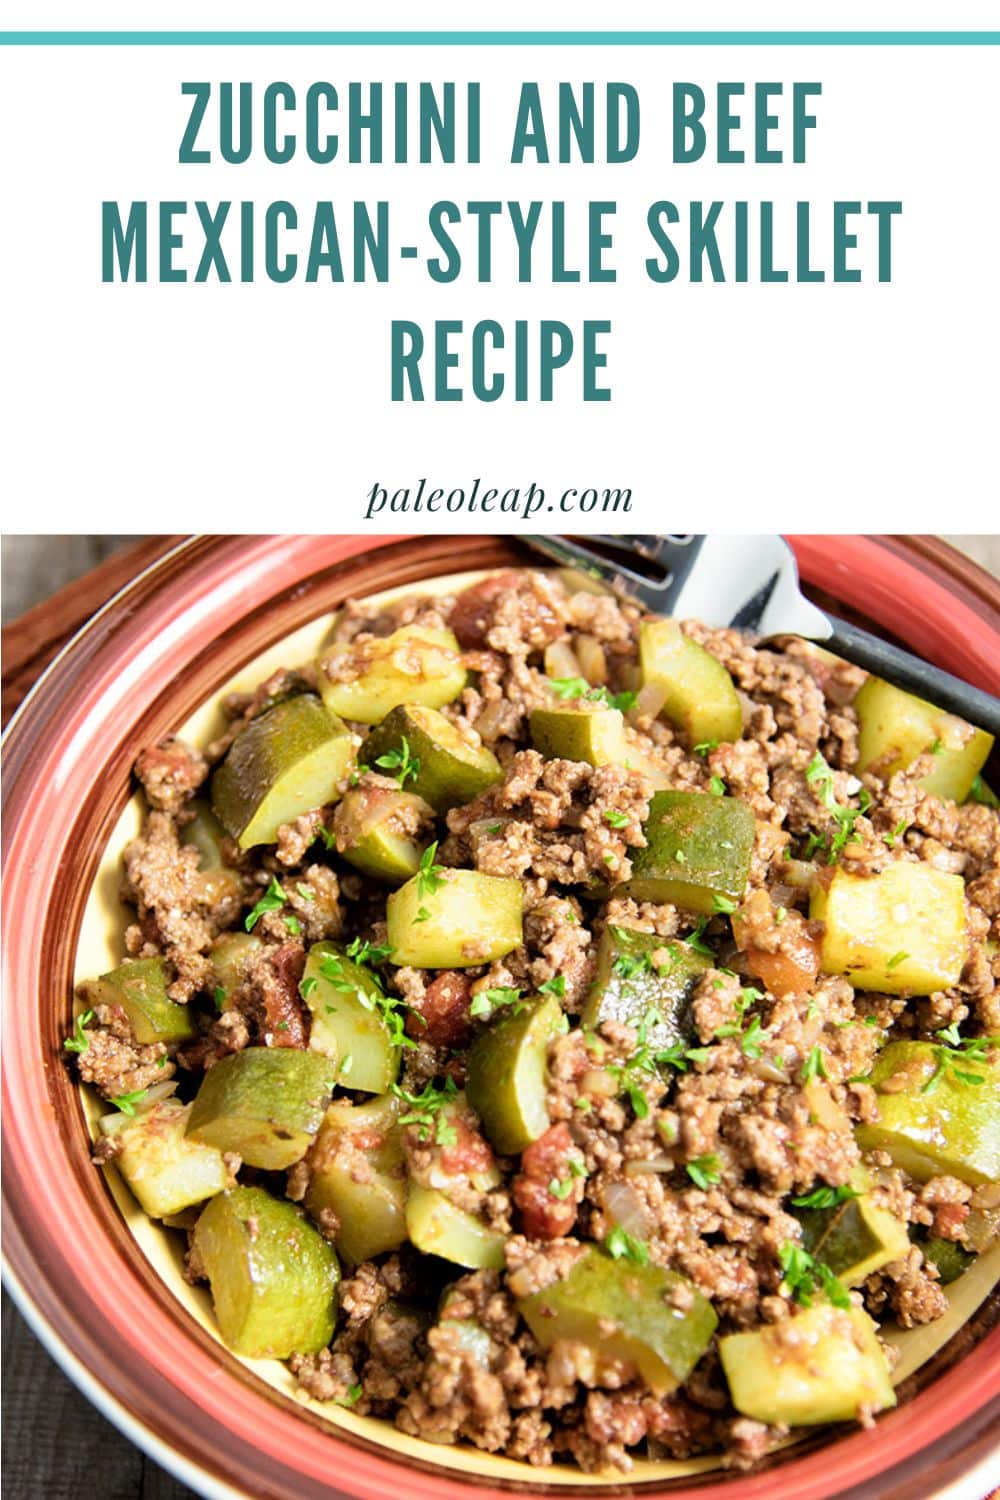 Zucchini and Beef Mexican-Style Skillet Recipe | Paleo Leap